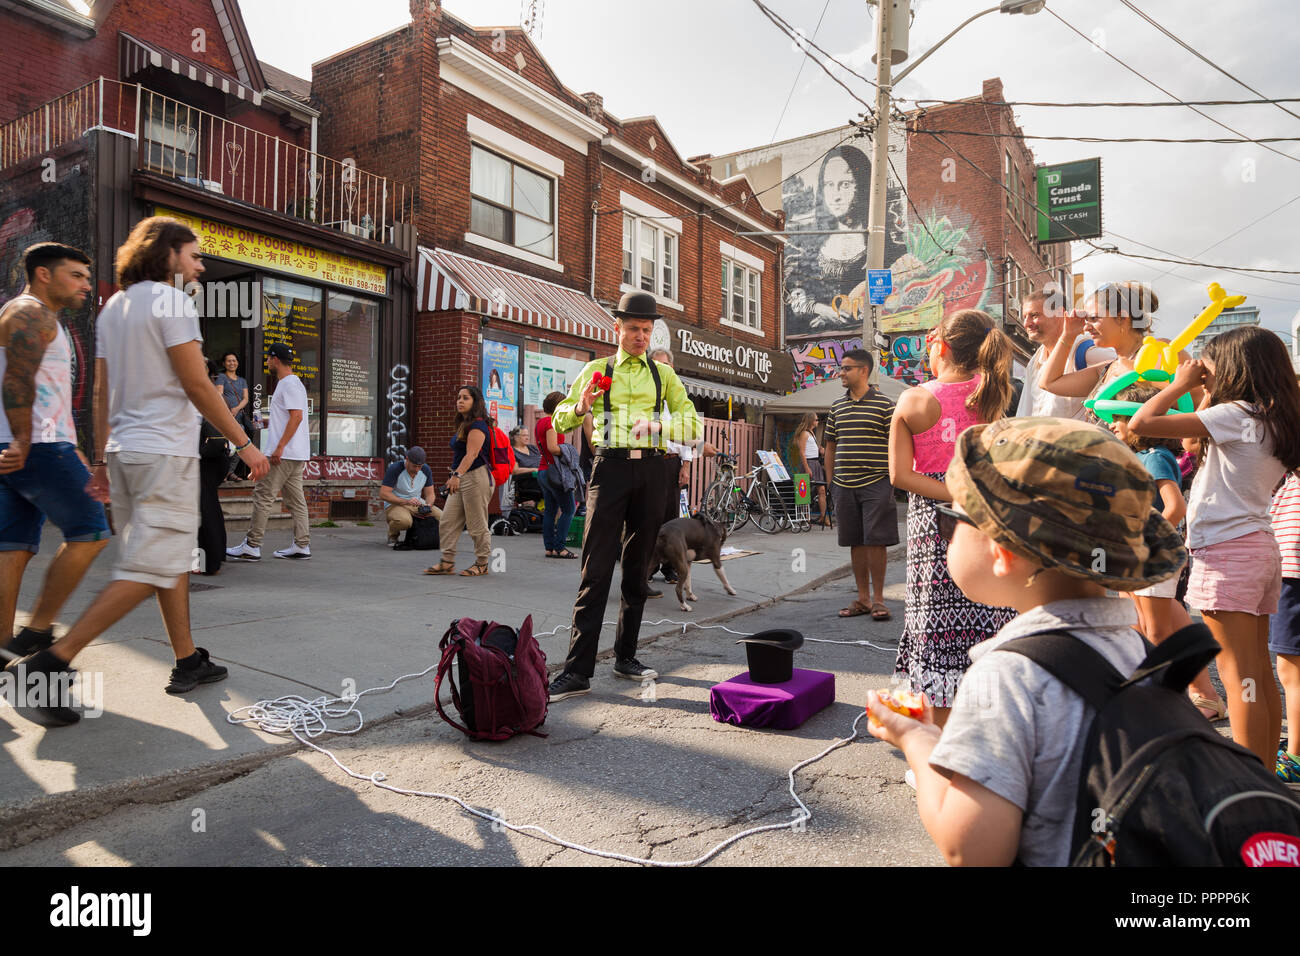 TORONTO, ON, CANADA - JULY 29, 2018: A child watches a street performer at Kensington market in Toronto. Stock Photo